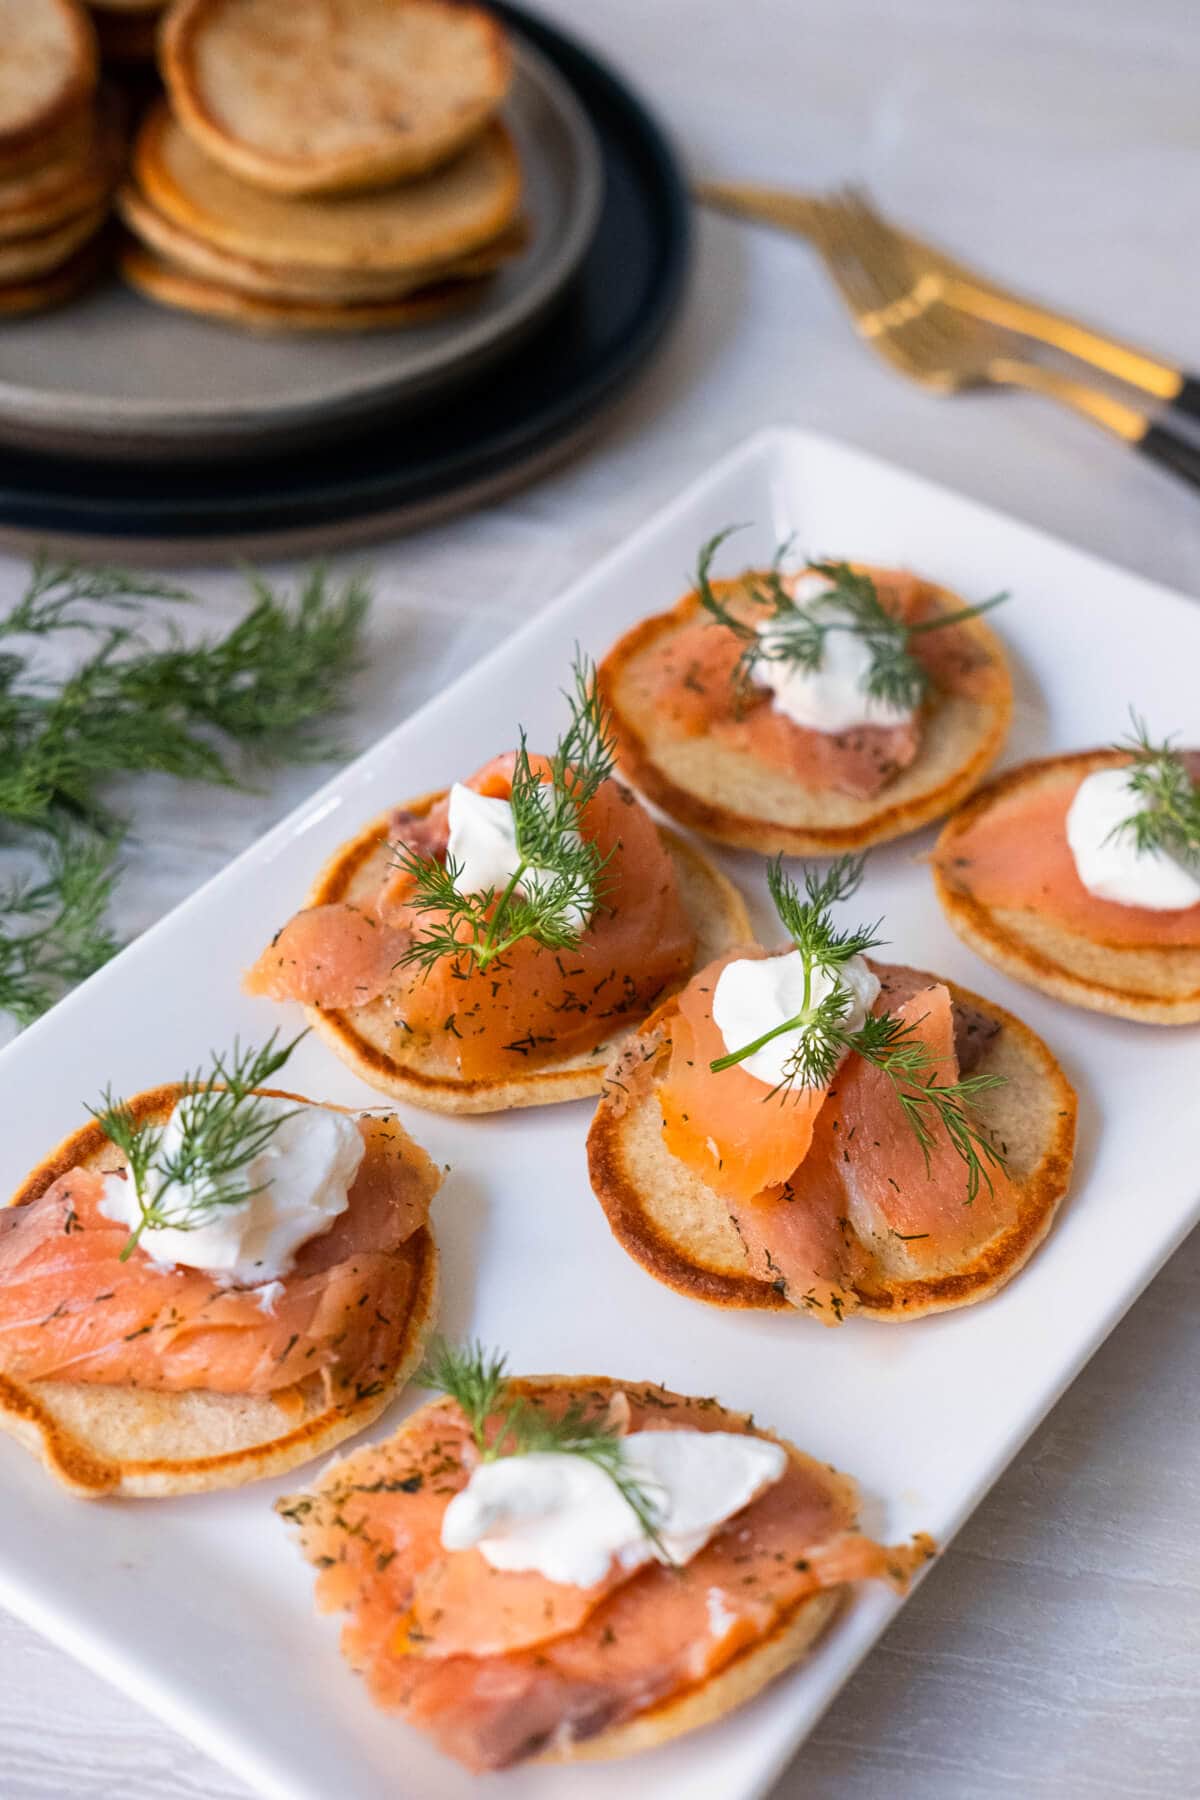 A close-up shot of a plate featuring a tempting display of golden-brown small Russian pancakes with a sour cream, smoked salmon, and fresh dill topped on top.